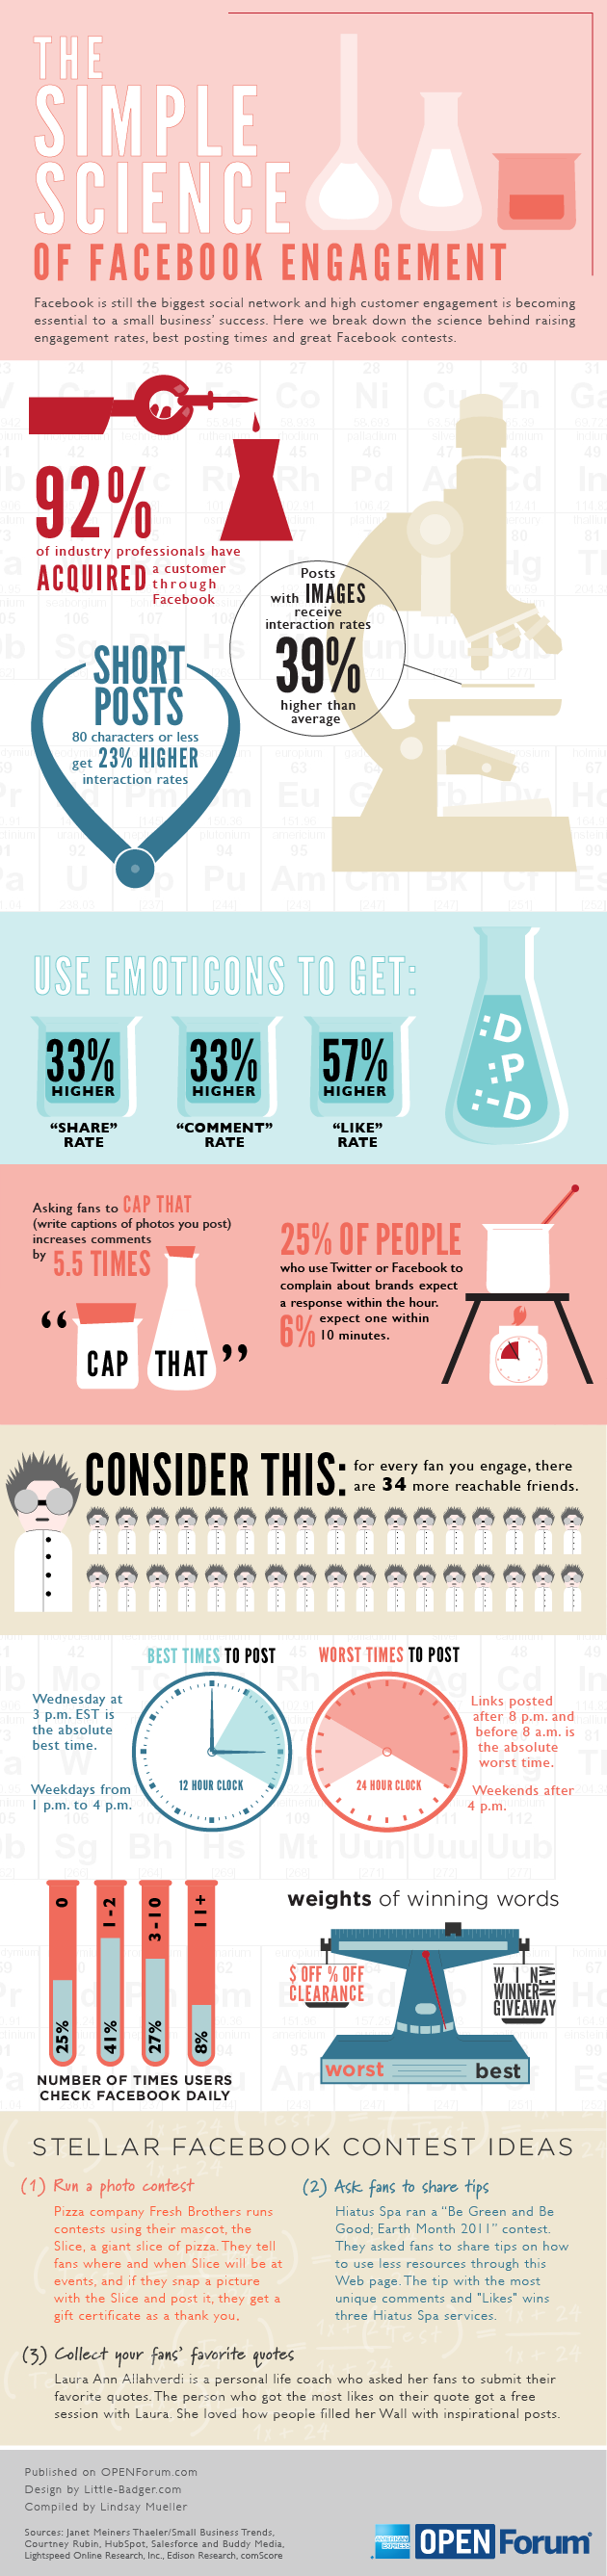 science-of-facebook-engagement-infographic